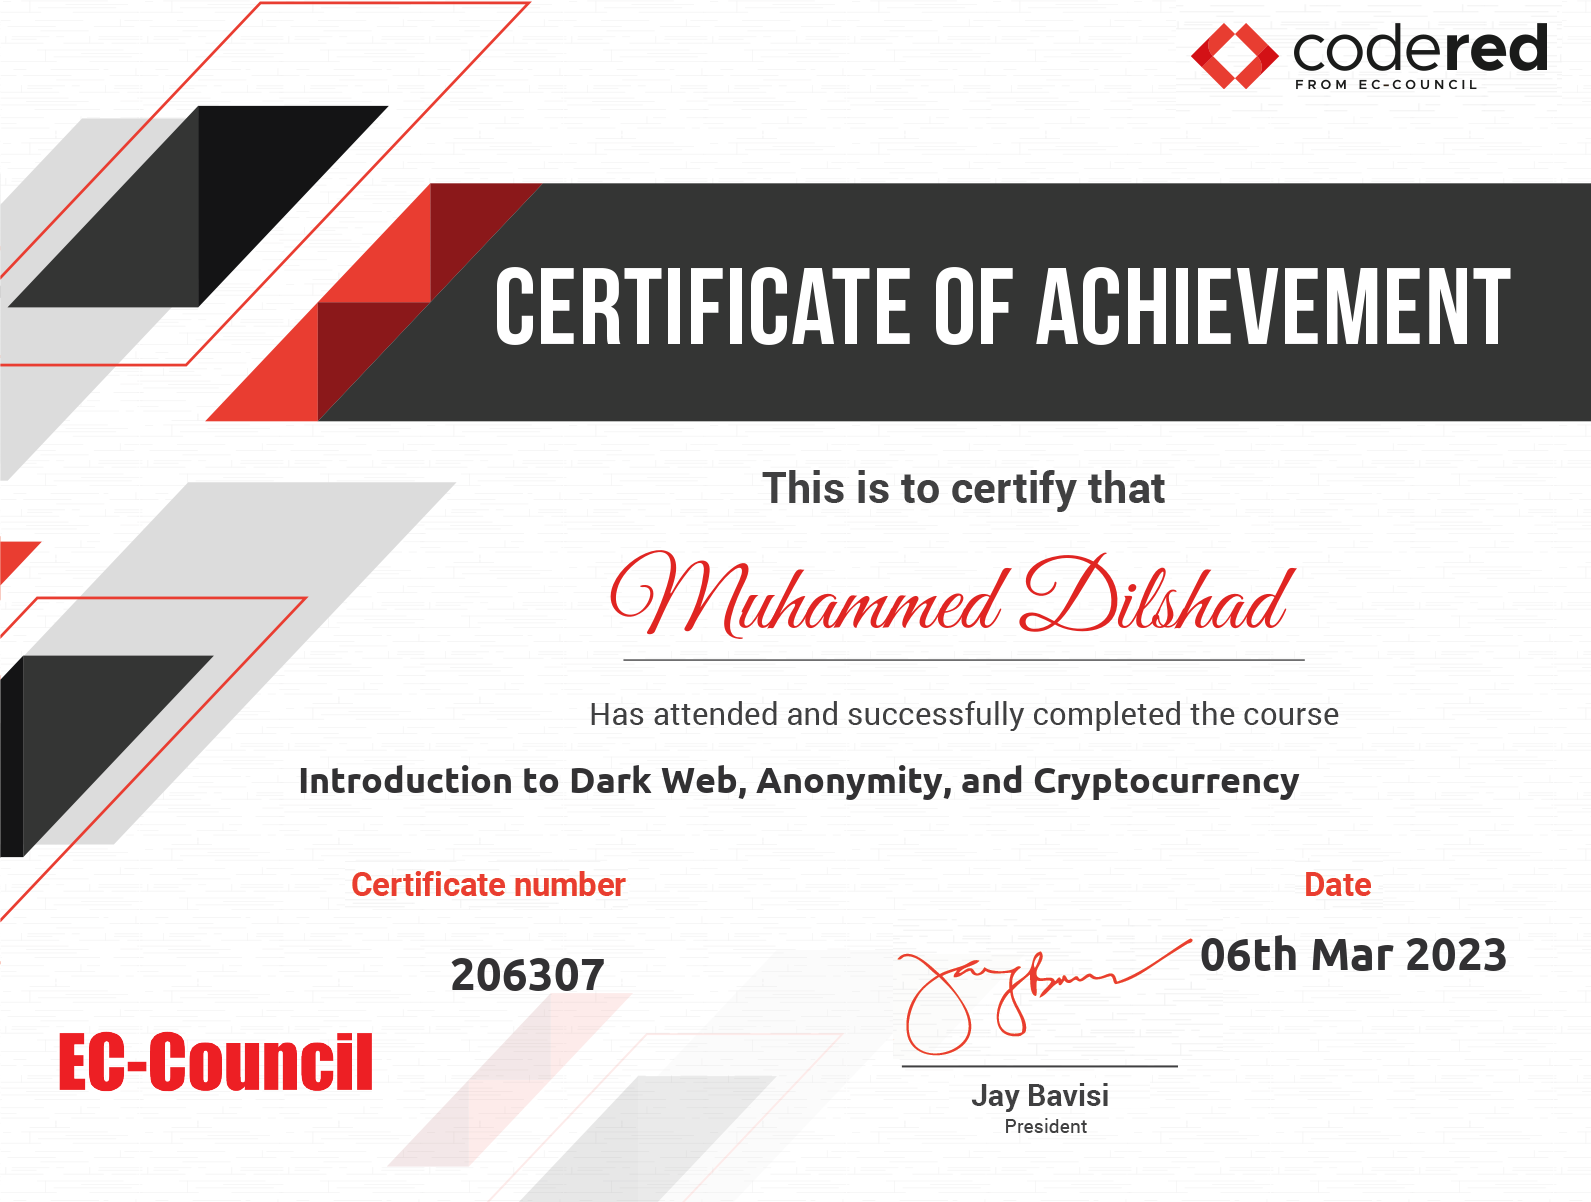 couNciL

> CERTIFICATE OF ACHIEVEMENT

This is to certify that

# O)Nlitemmed Dilstad

Has attended and successfully completed the course
Introduction to Dark Web, Anonymity, and Cryptocurrency
Certificate number Date

206307 SE Mar 2023

Jay Bavisi

President